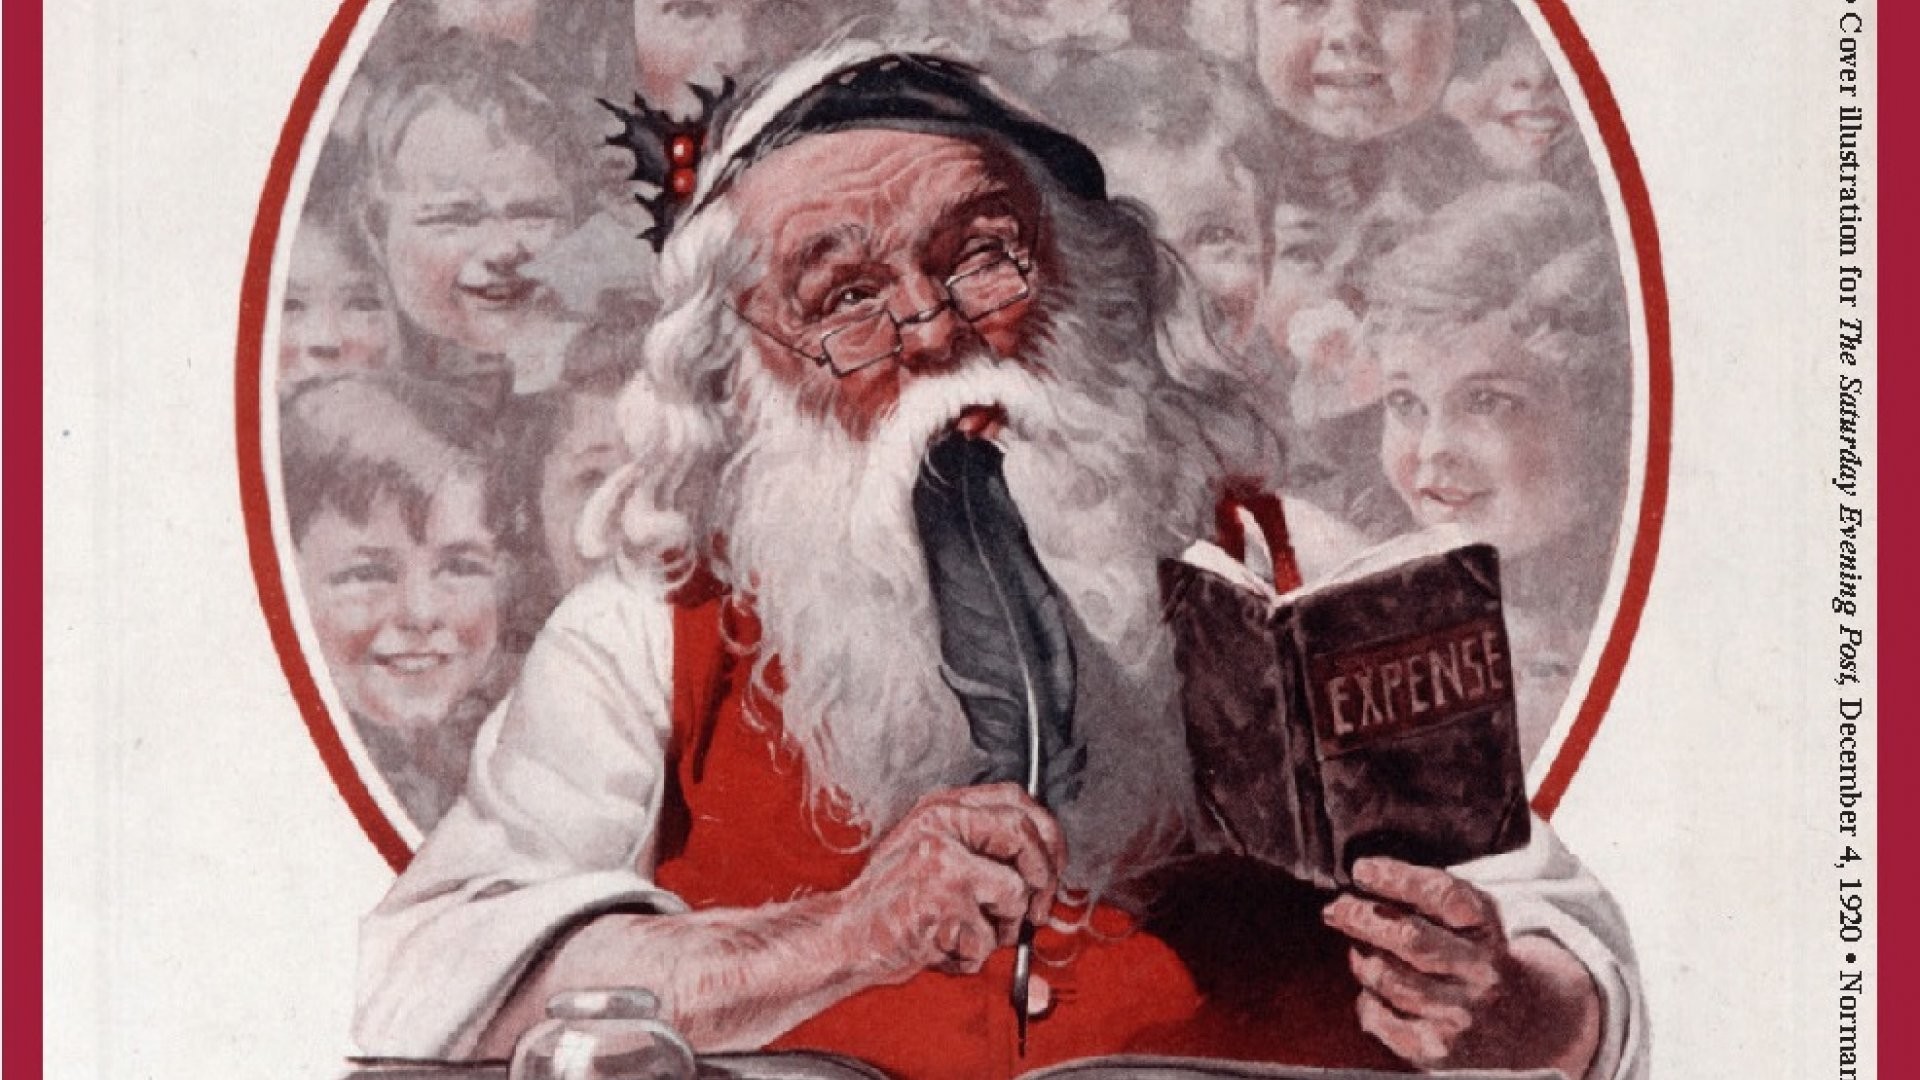 1920x1080 Norman Rockwell's Home for the Holidays